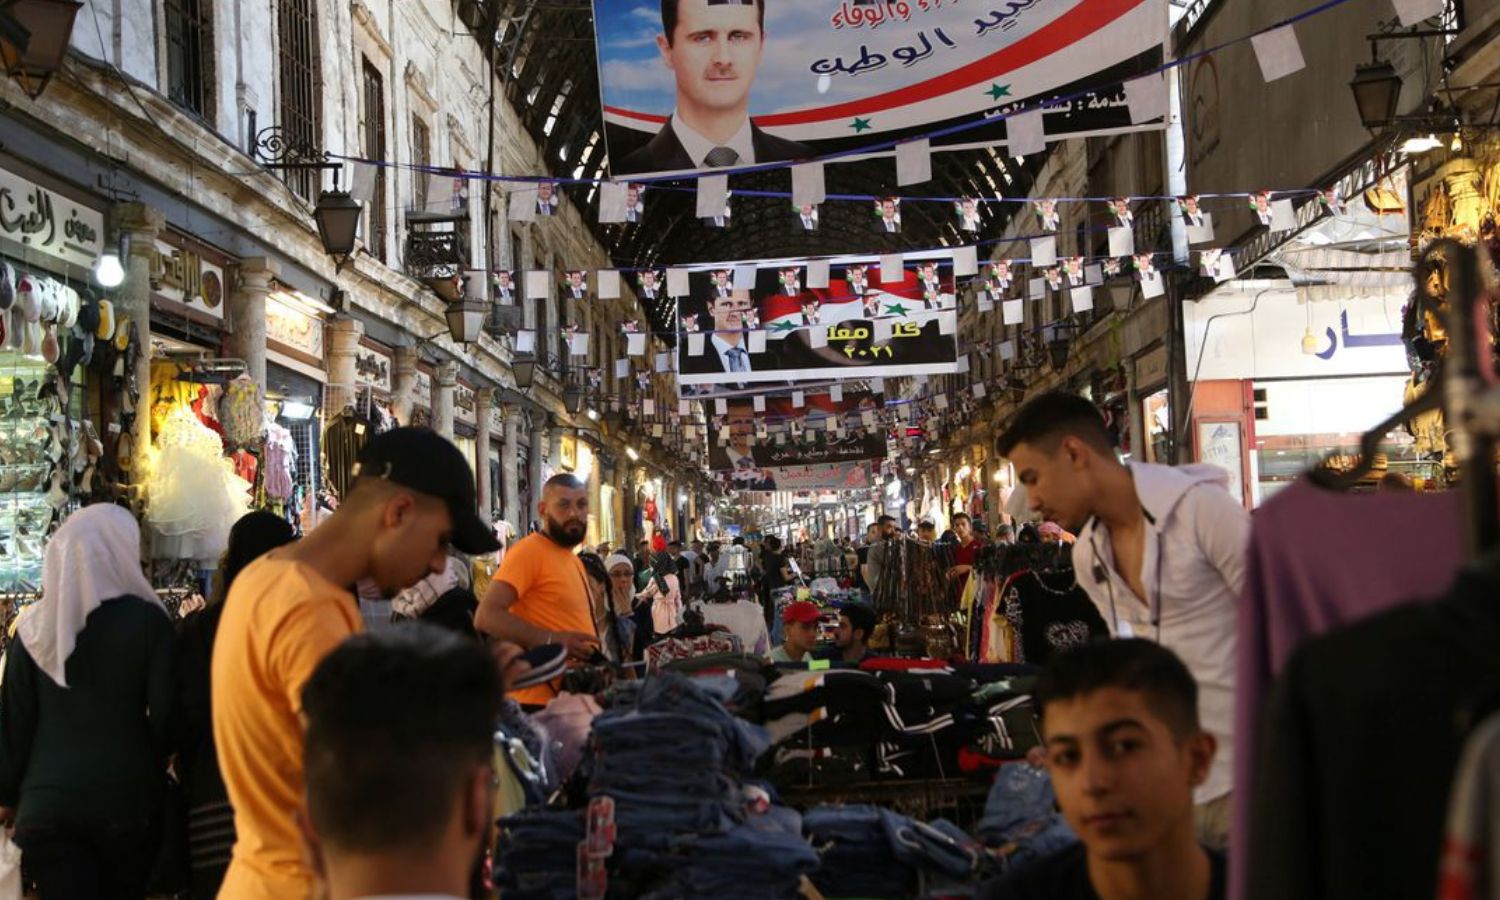 The traditional al-Hamidiya market with posters of the head of the Syrian regime, Bashar al-Assad in Damascus - 22 May 2021 (Reuters)